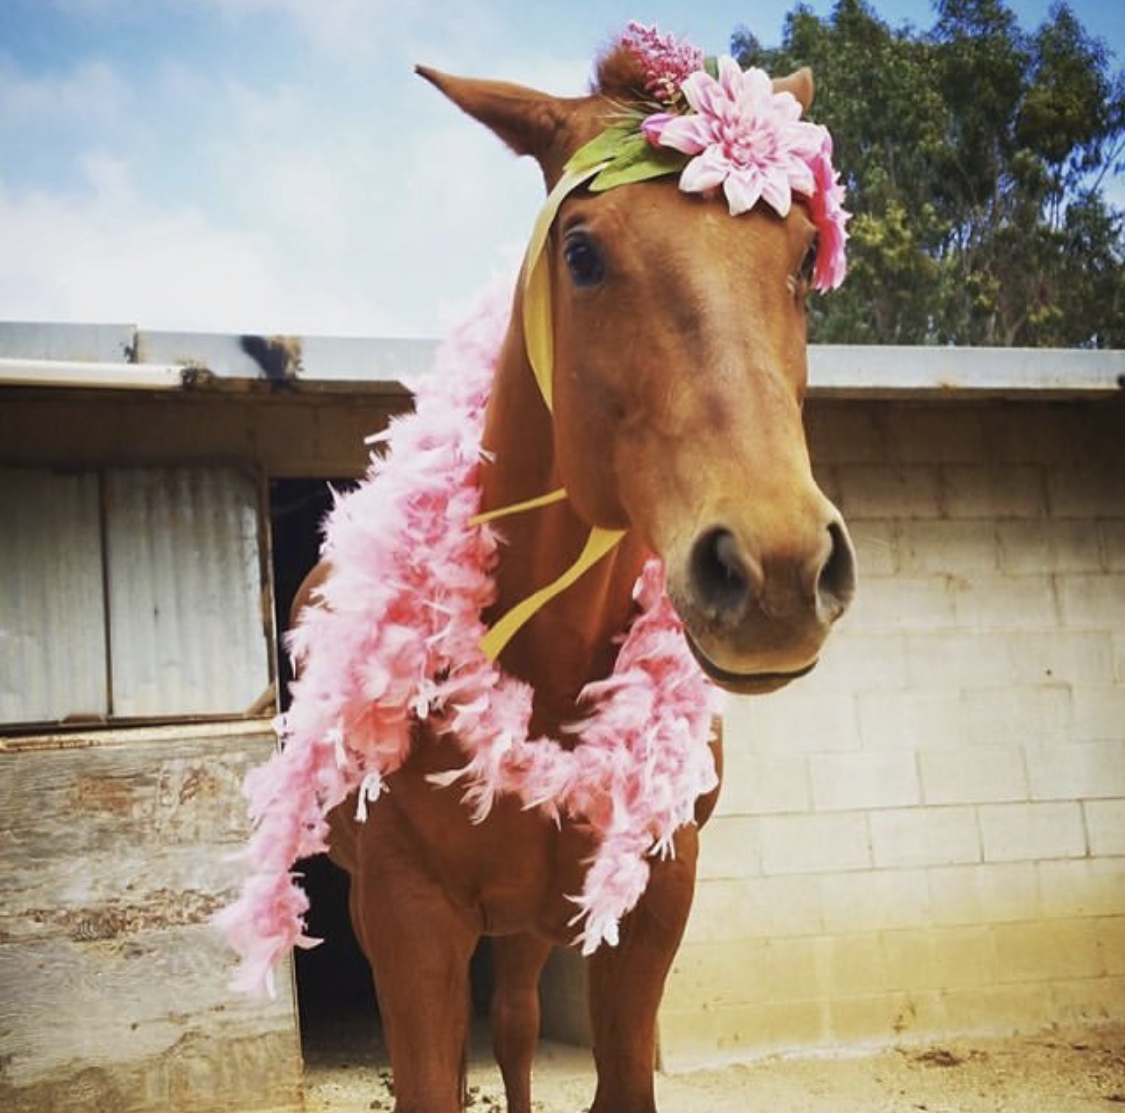 A Horse wearing pink feathers around its neck and a pink flower headpiece